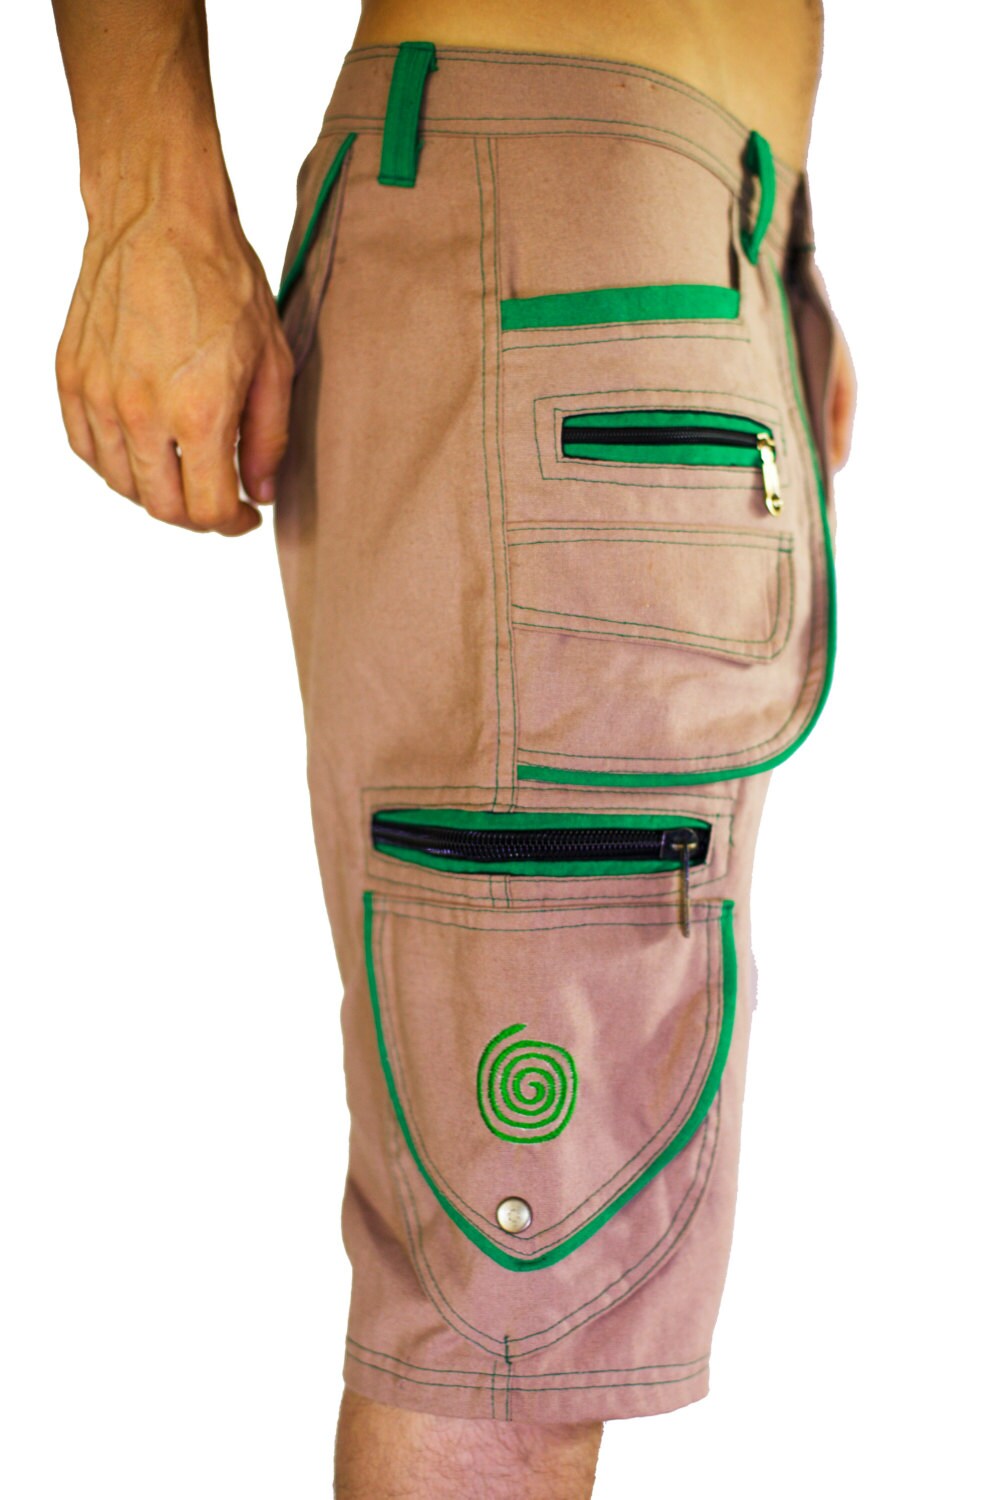 Goa Hippie Pant clamdiggers 11 pockets made after order fully customizable